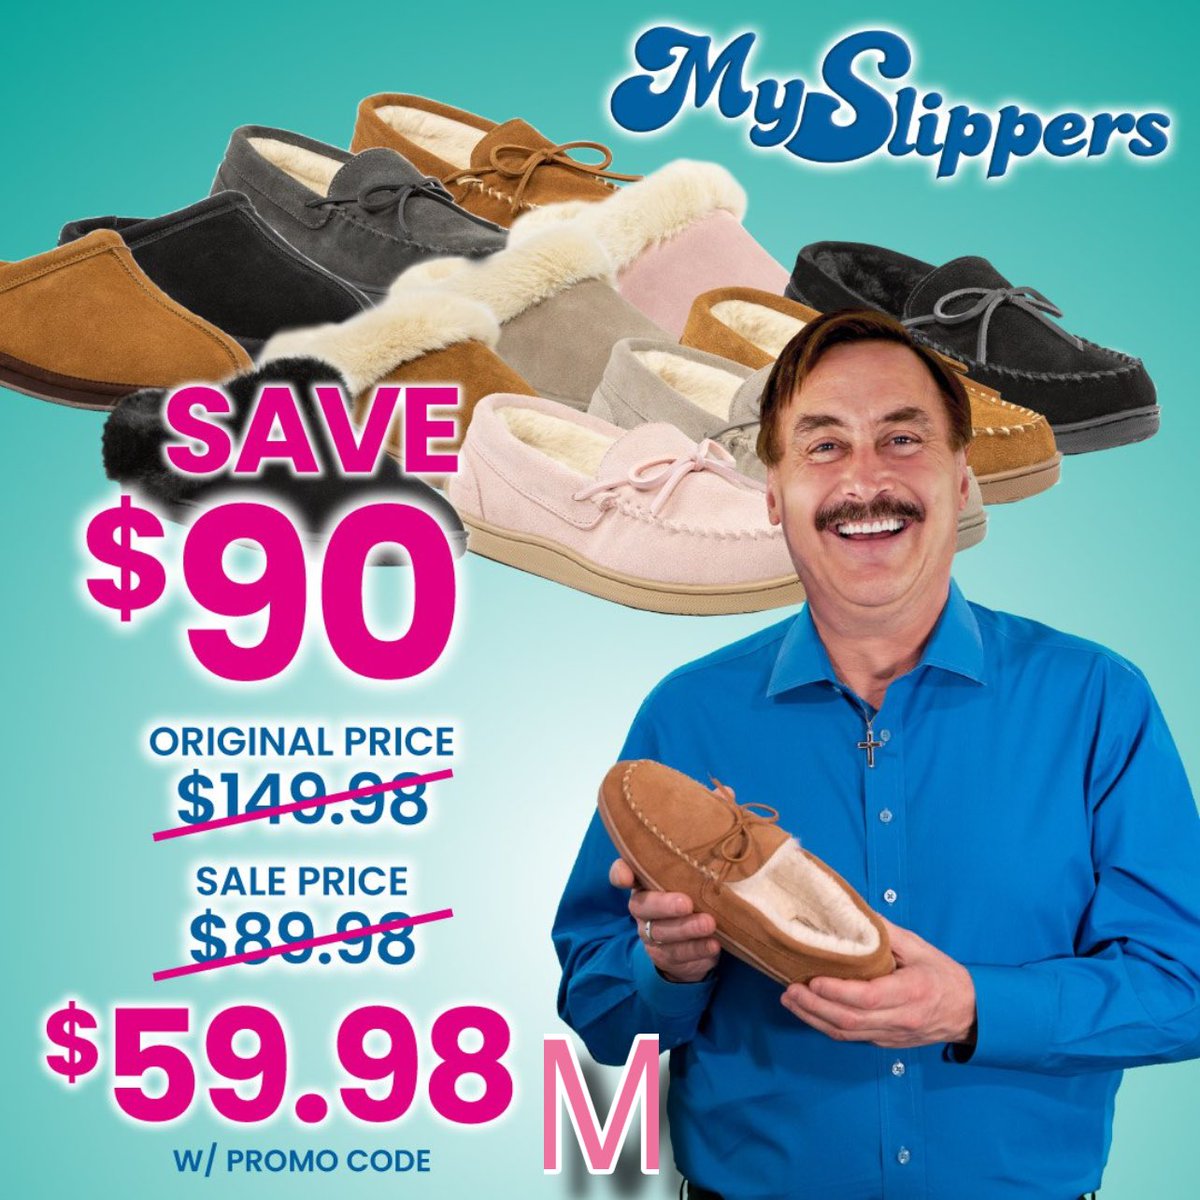 Let your feet indulge in a cloud of comfort! Slip into the cozy embrace of MySlippers for just $59.98 and FREE shipping on your ENTIRE order with promo code 👉M👈Your feet will thank you. #MySlippers #HomeComforts #FreeShippingBliss mypillow.com/slipper-specia… #MyPillowPromoCodeM